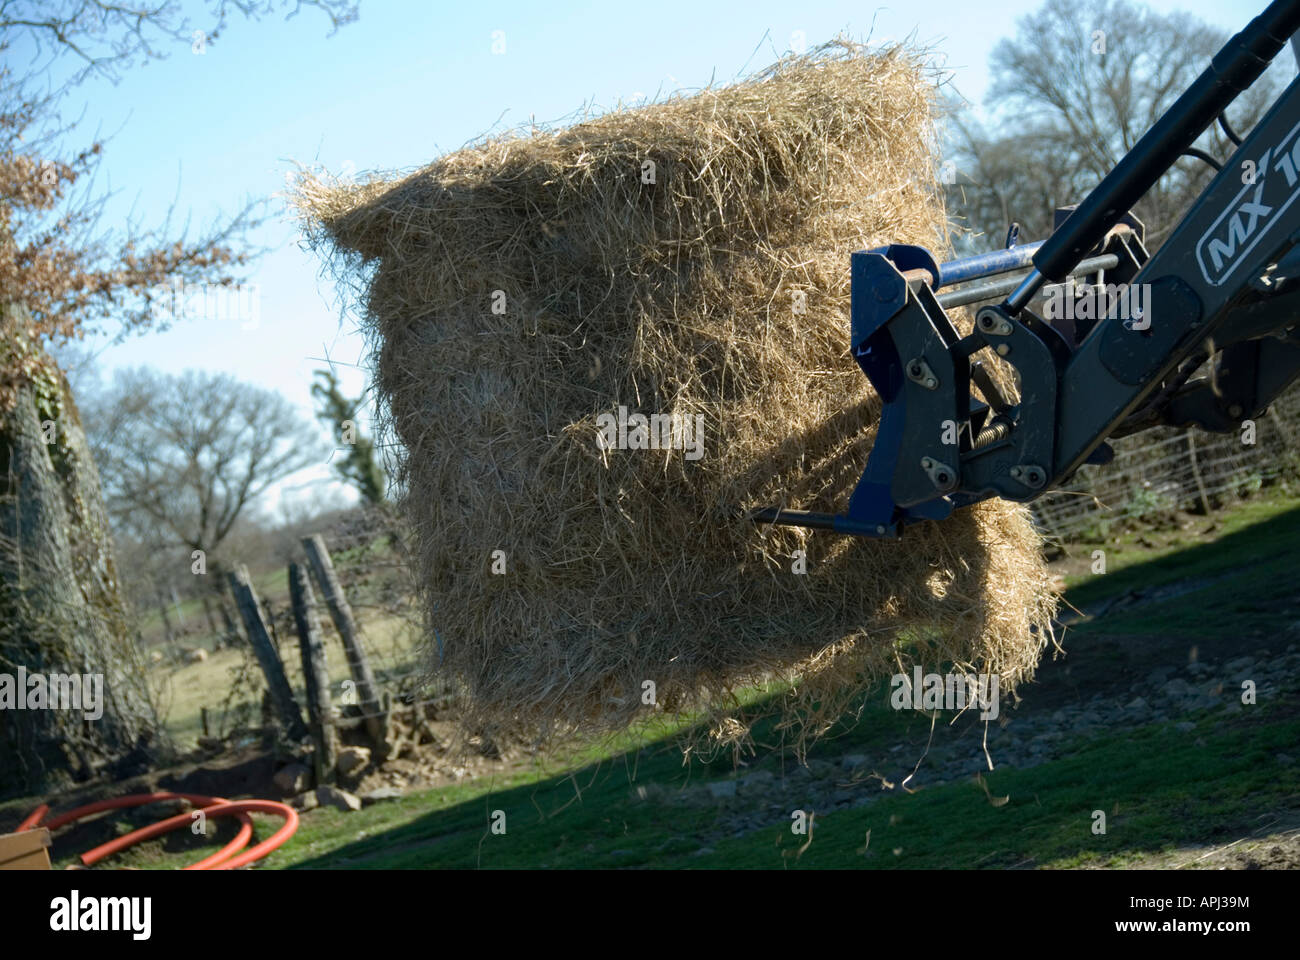 Stock Photo of a tractor carrying a bale of hay to feed the livestock in Winter The photo was taken in the Limousin region of Fr Stock Photo